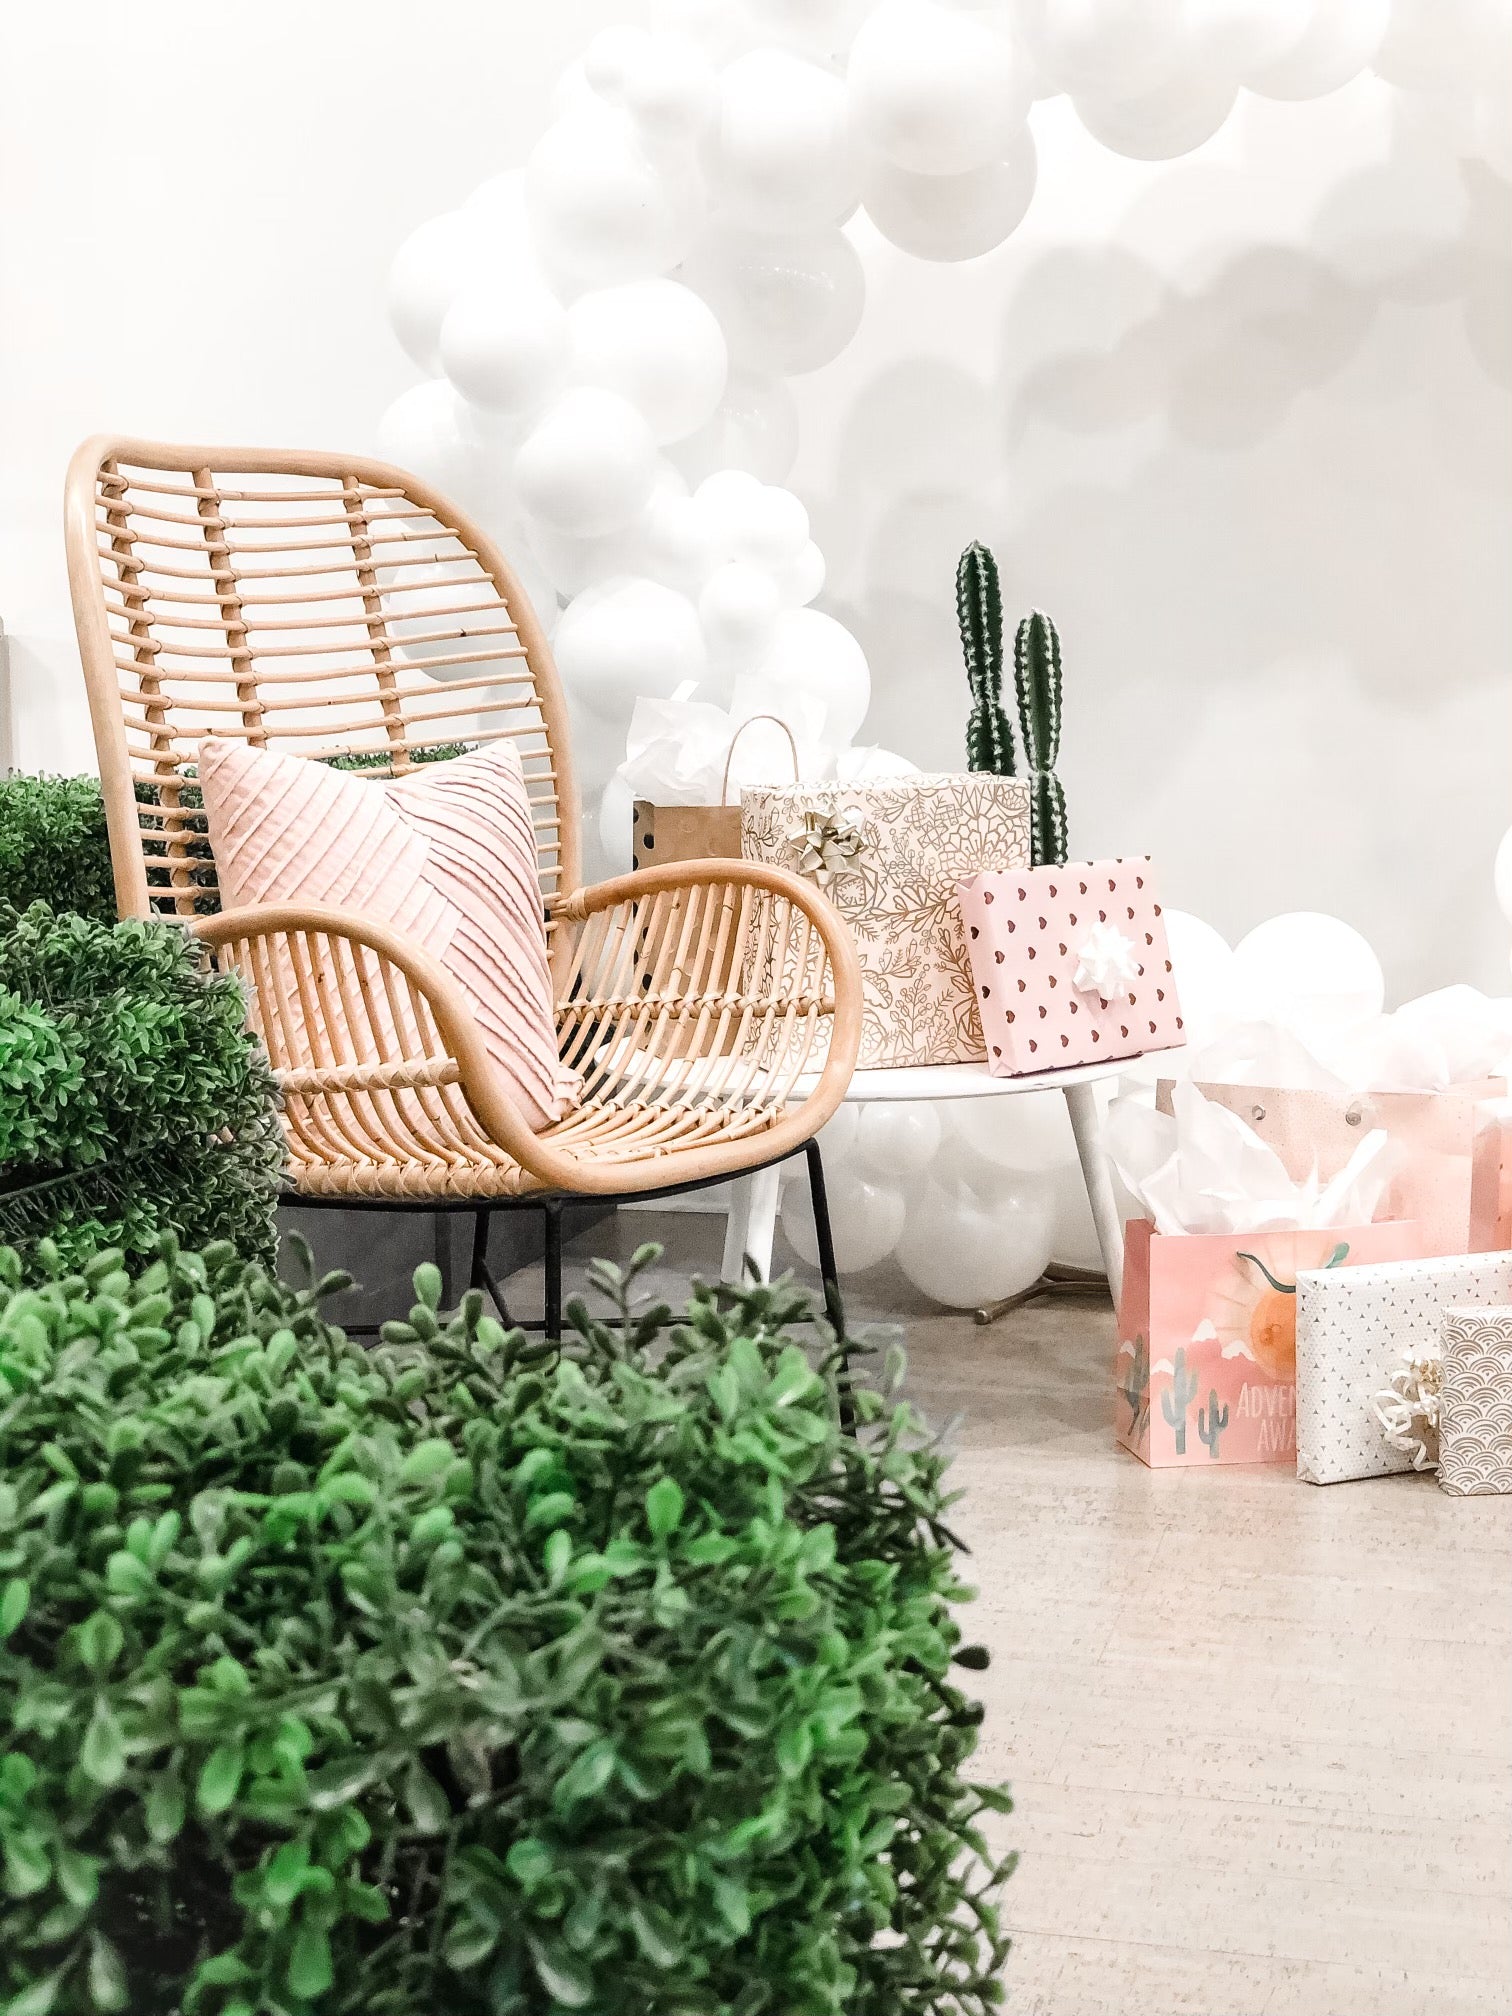 A picturesque seating area for opening gifts at a baby shower